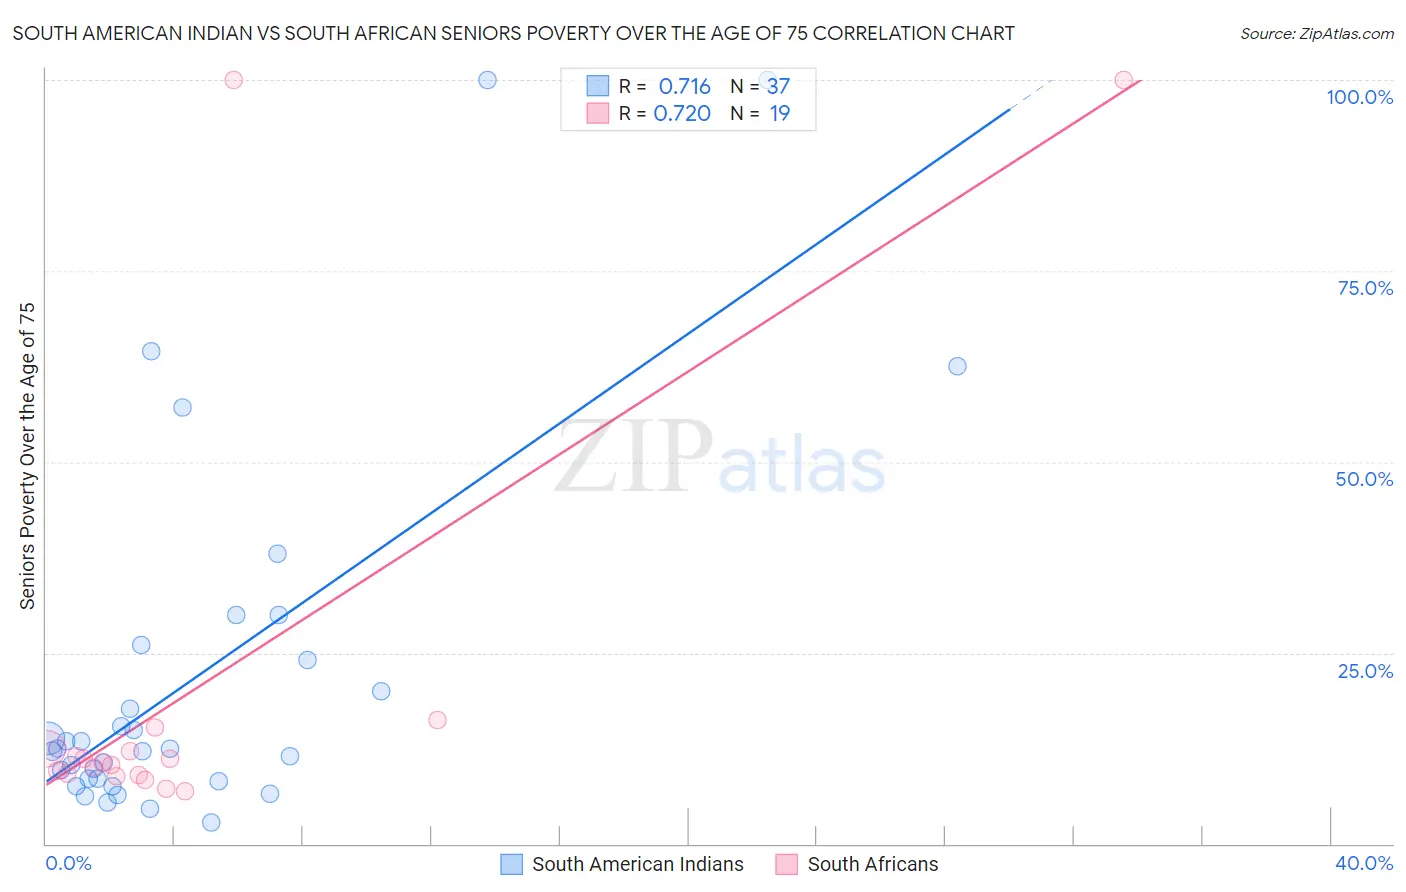 South American Indian vs South African Seniors Poverty Over the Age of 75